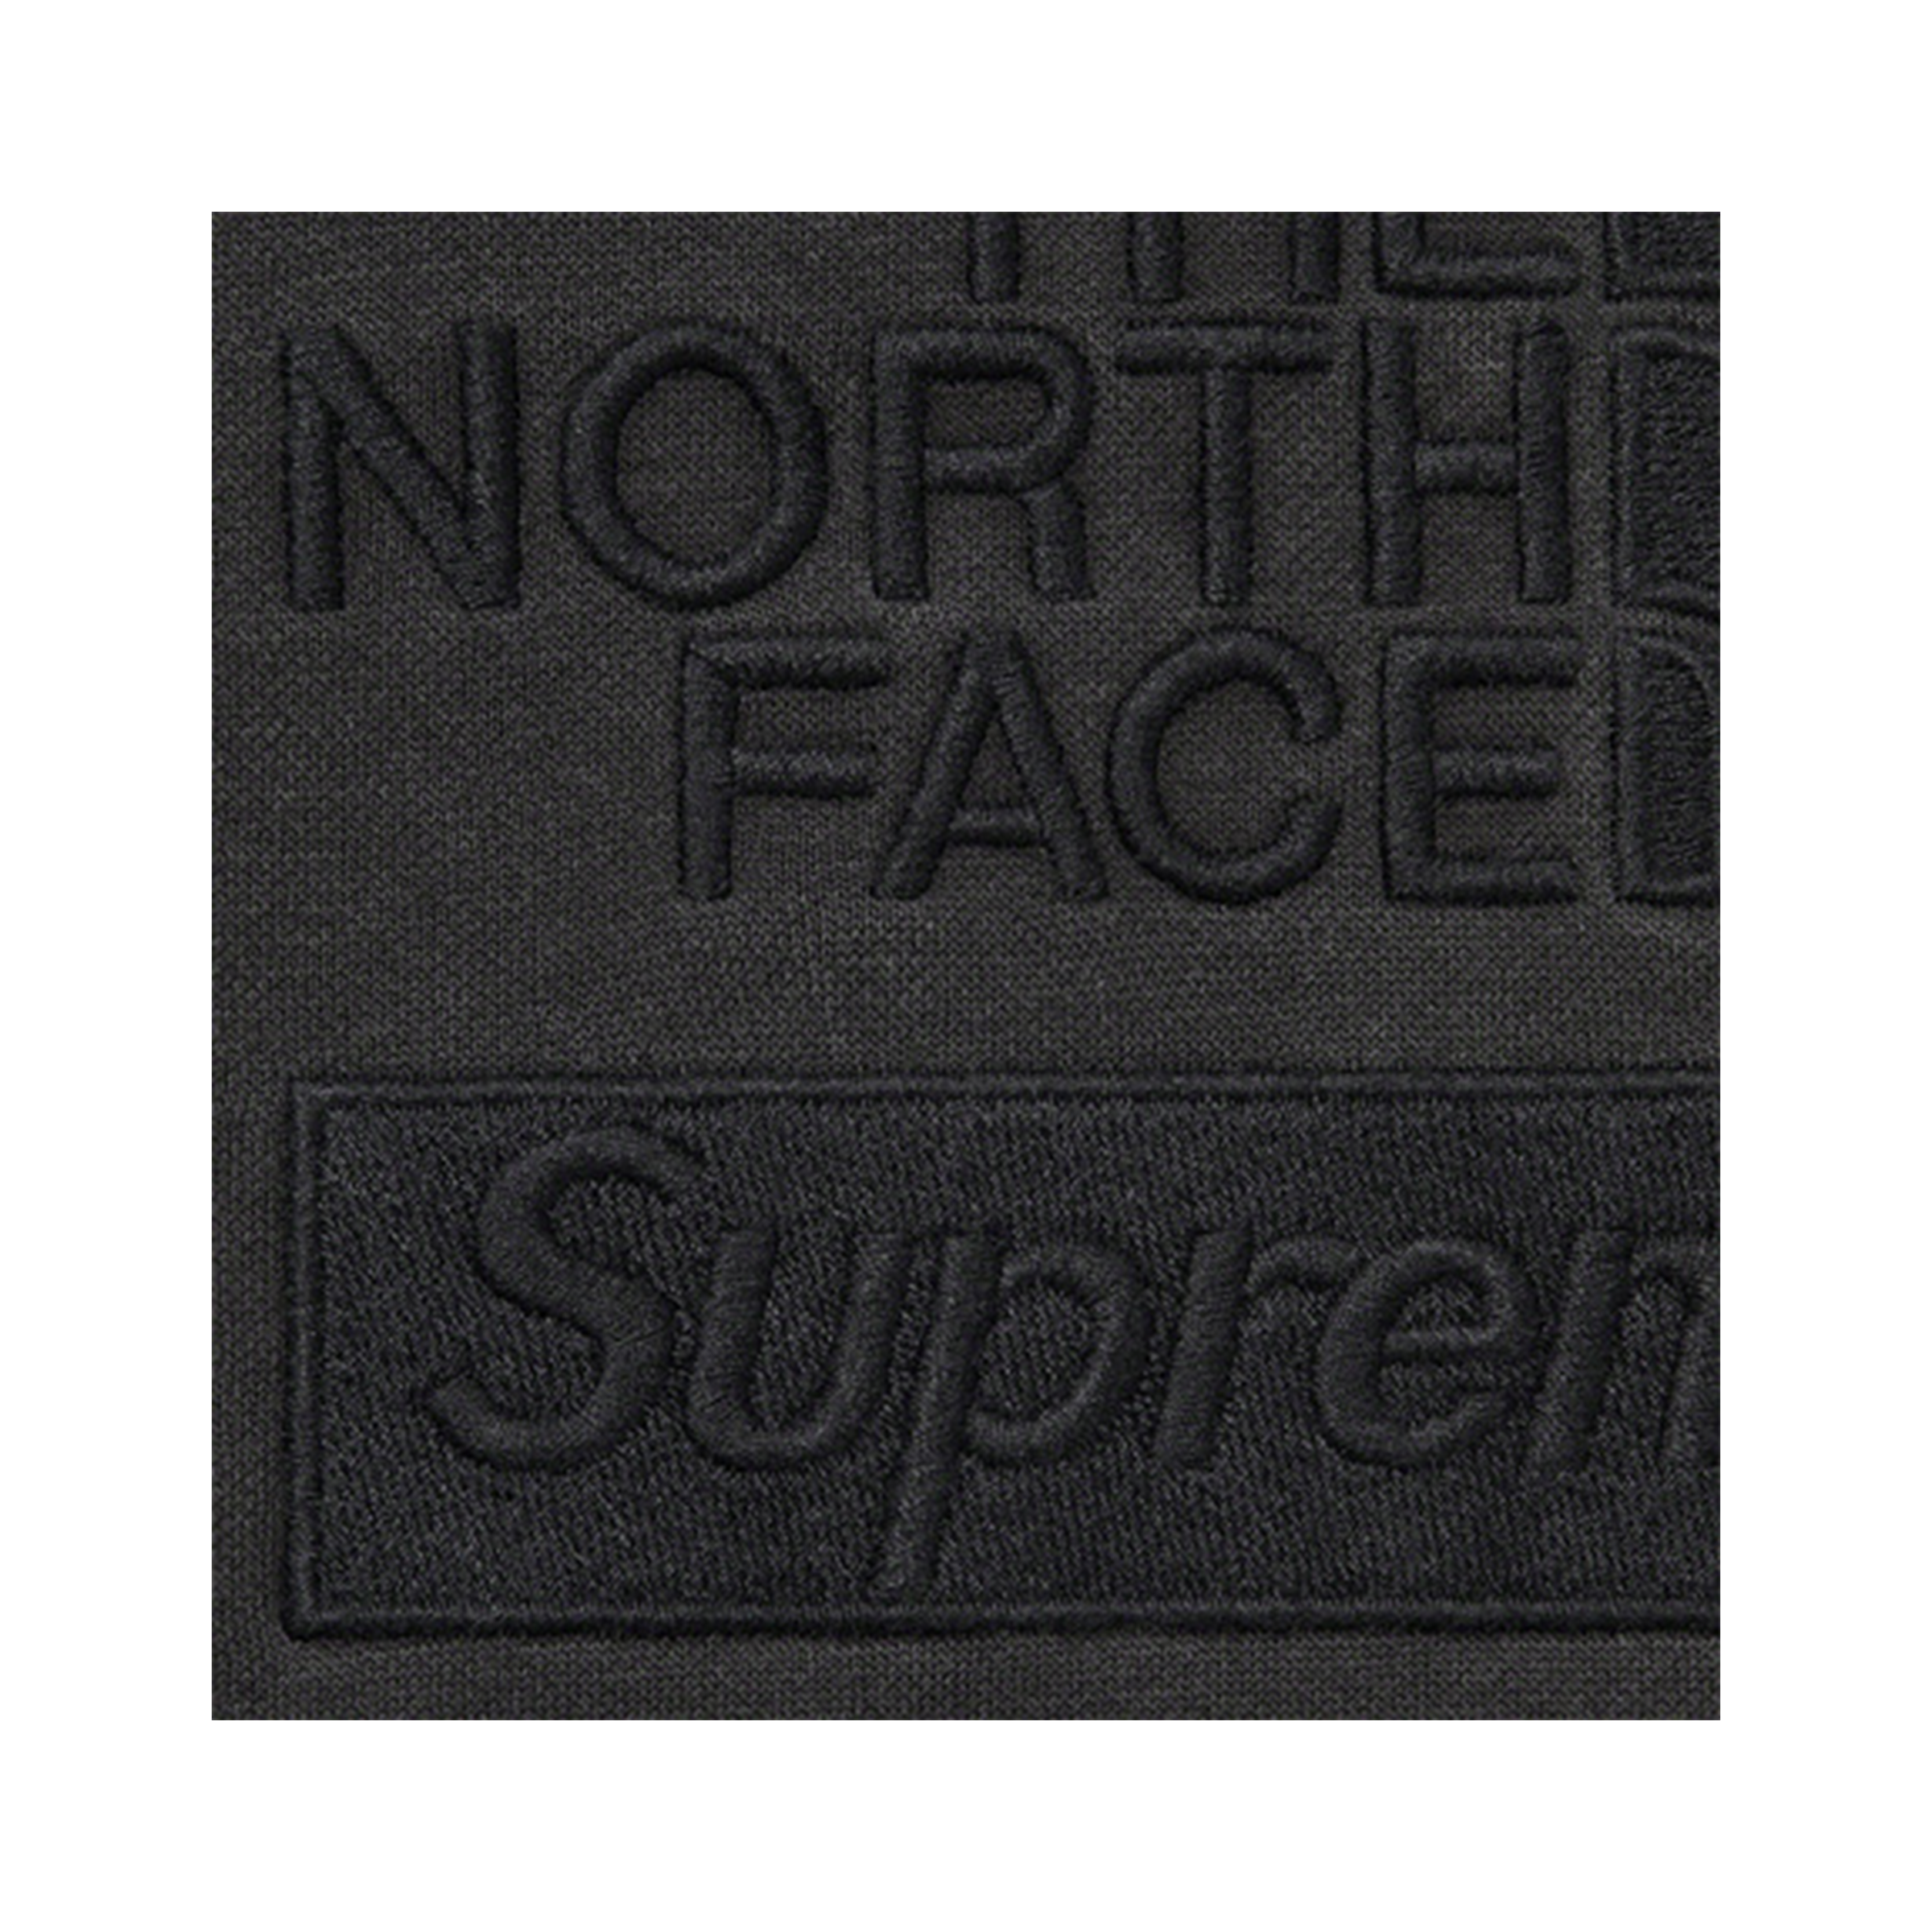 Supreme x The North Face - Hooded Sweatshirt - Small